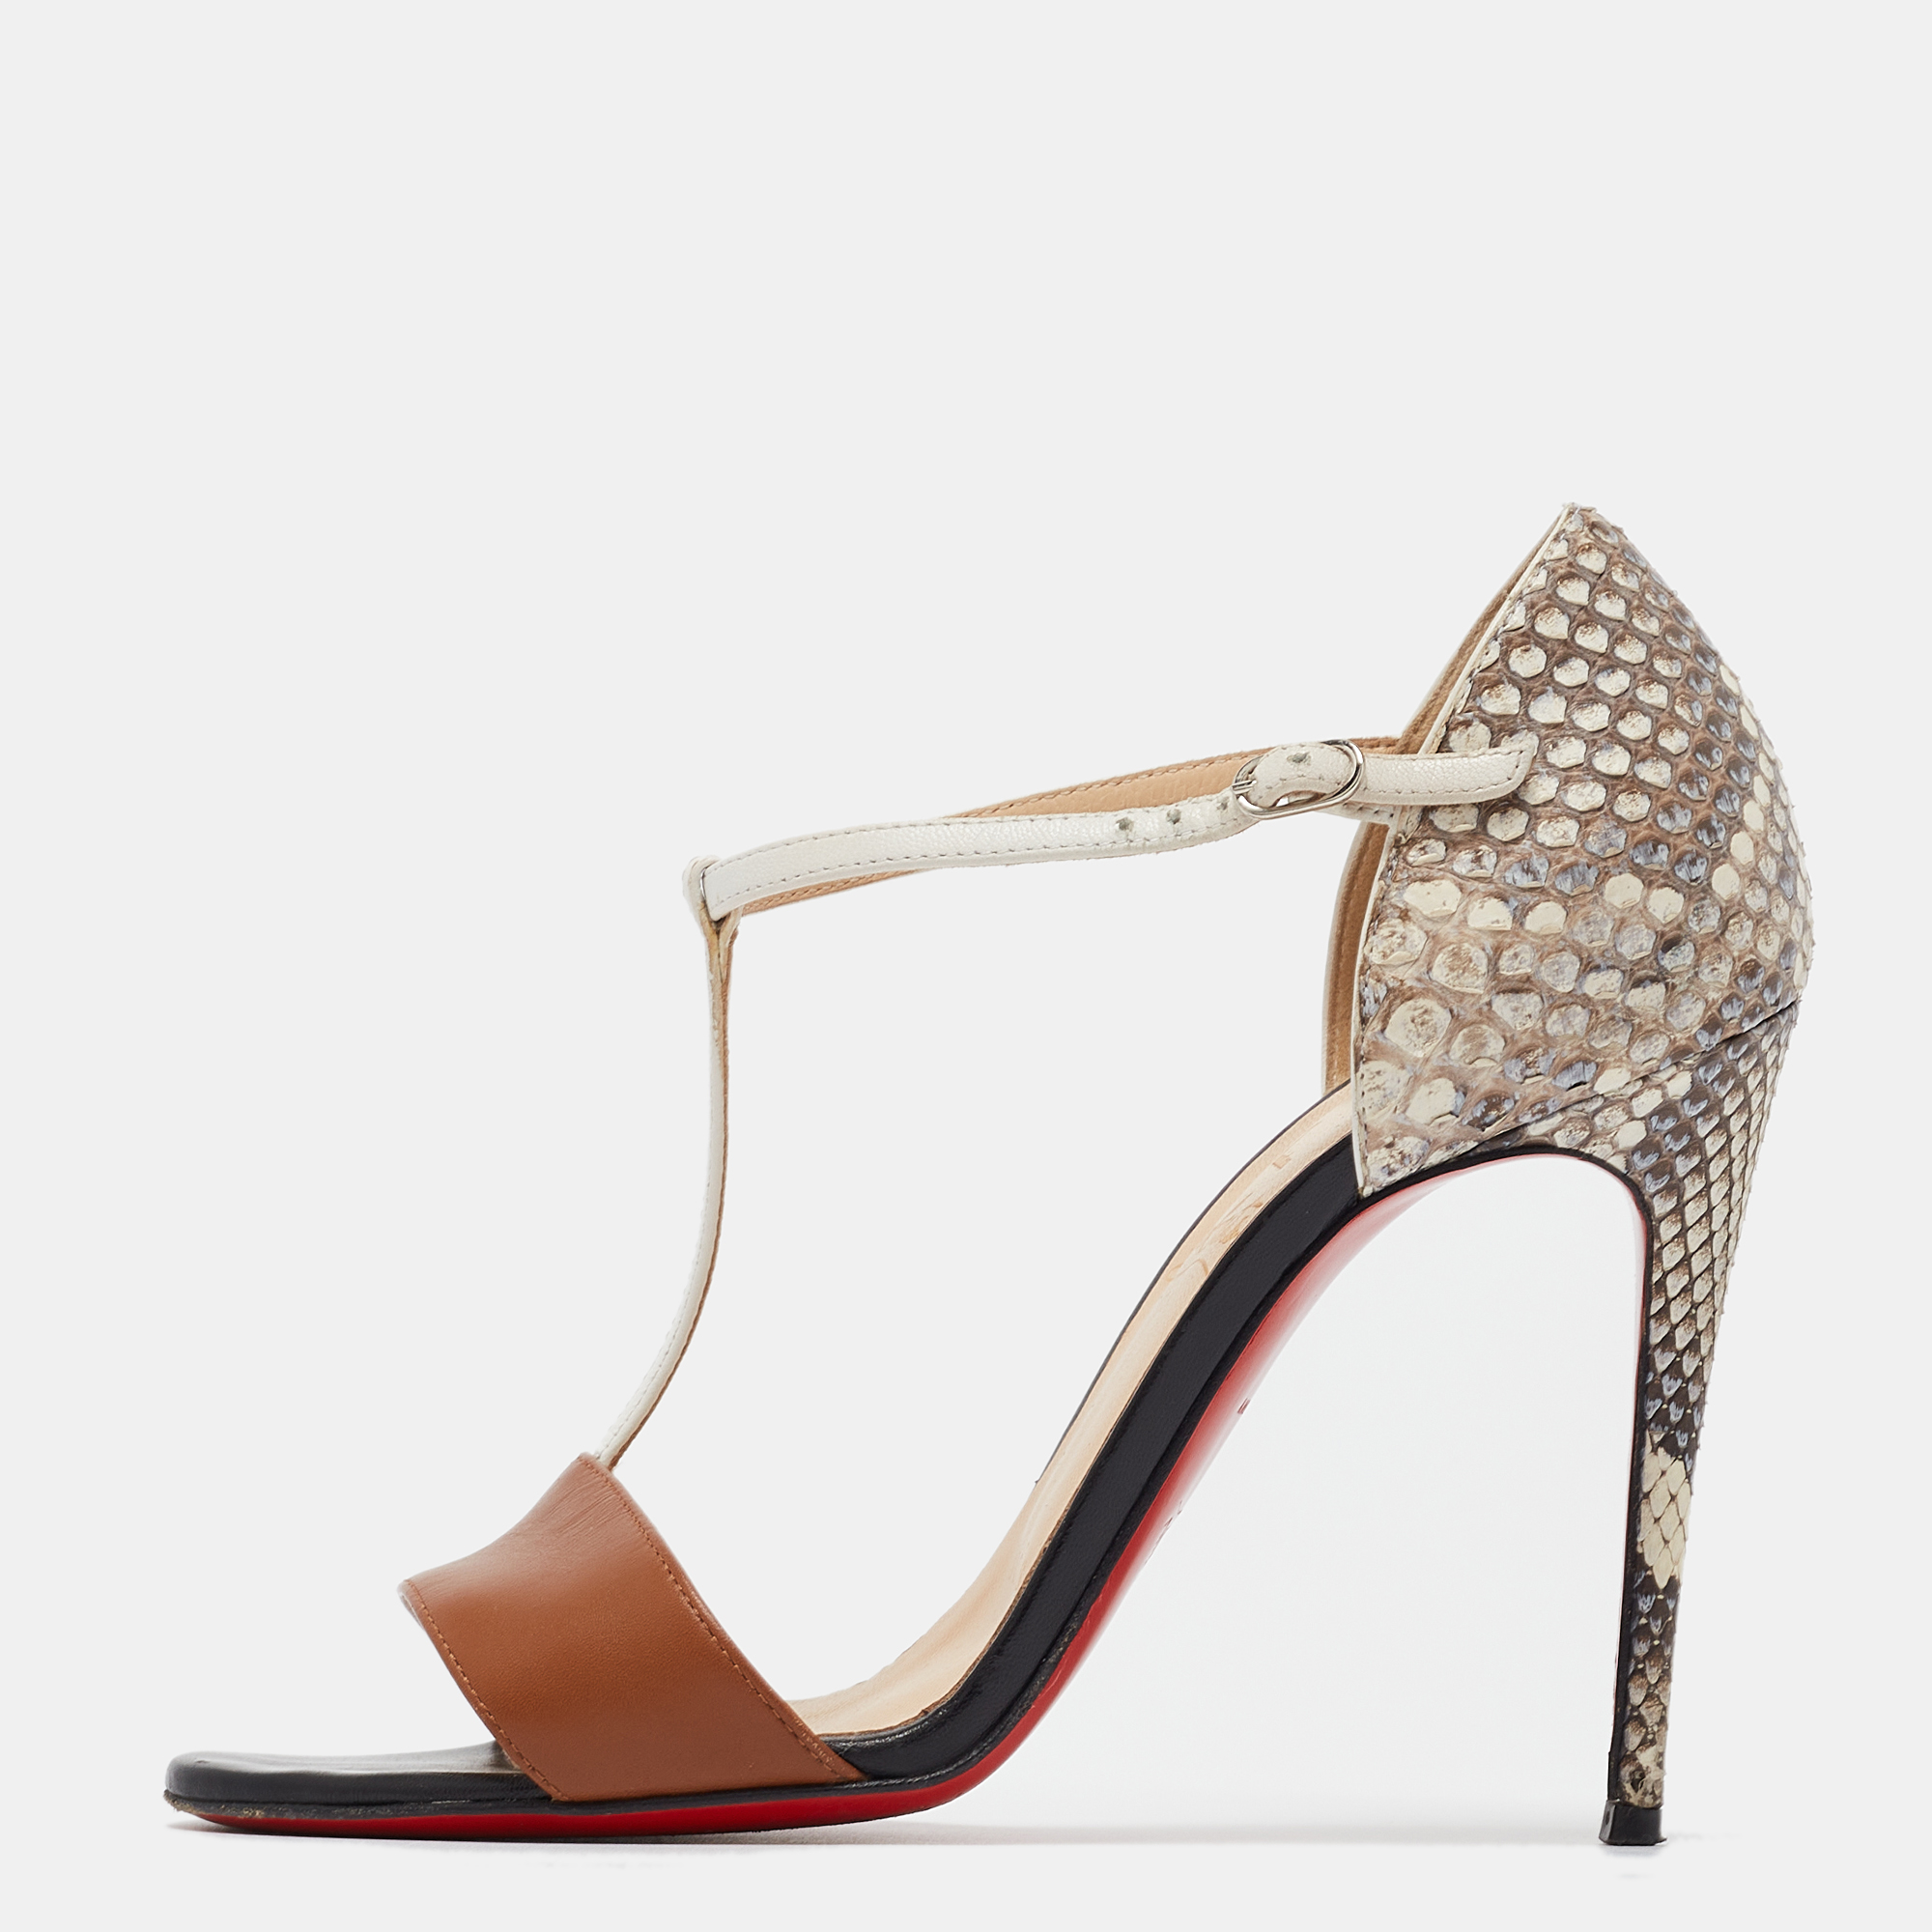 Christian louboutin multicolor python and leather mayerling sandals size 36